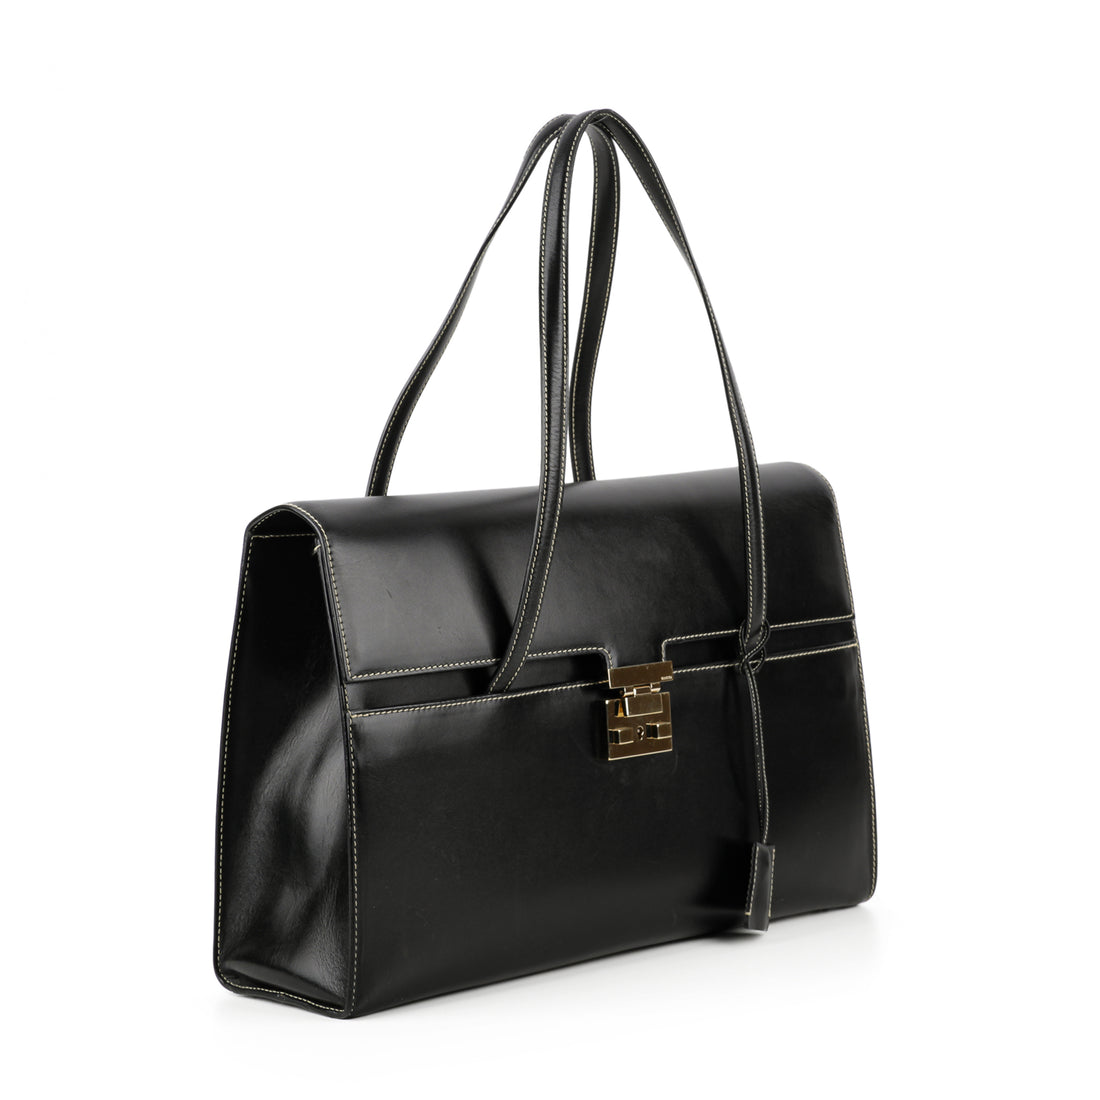 GUCCI Lady Lock Flap Tote - Black Leather